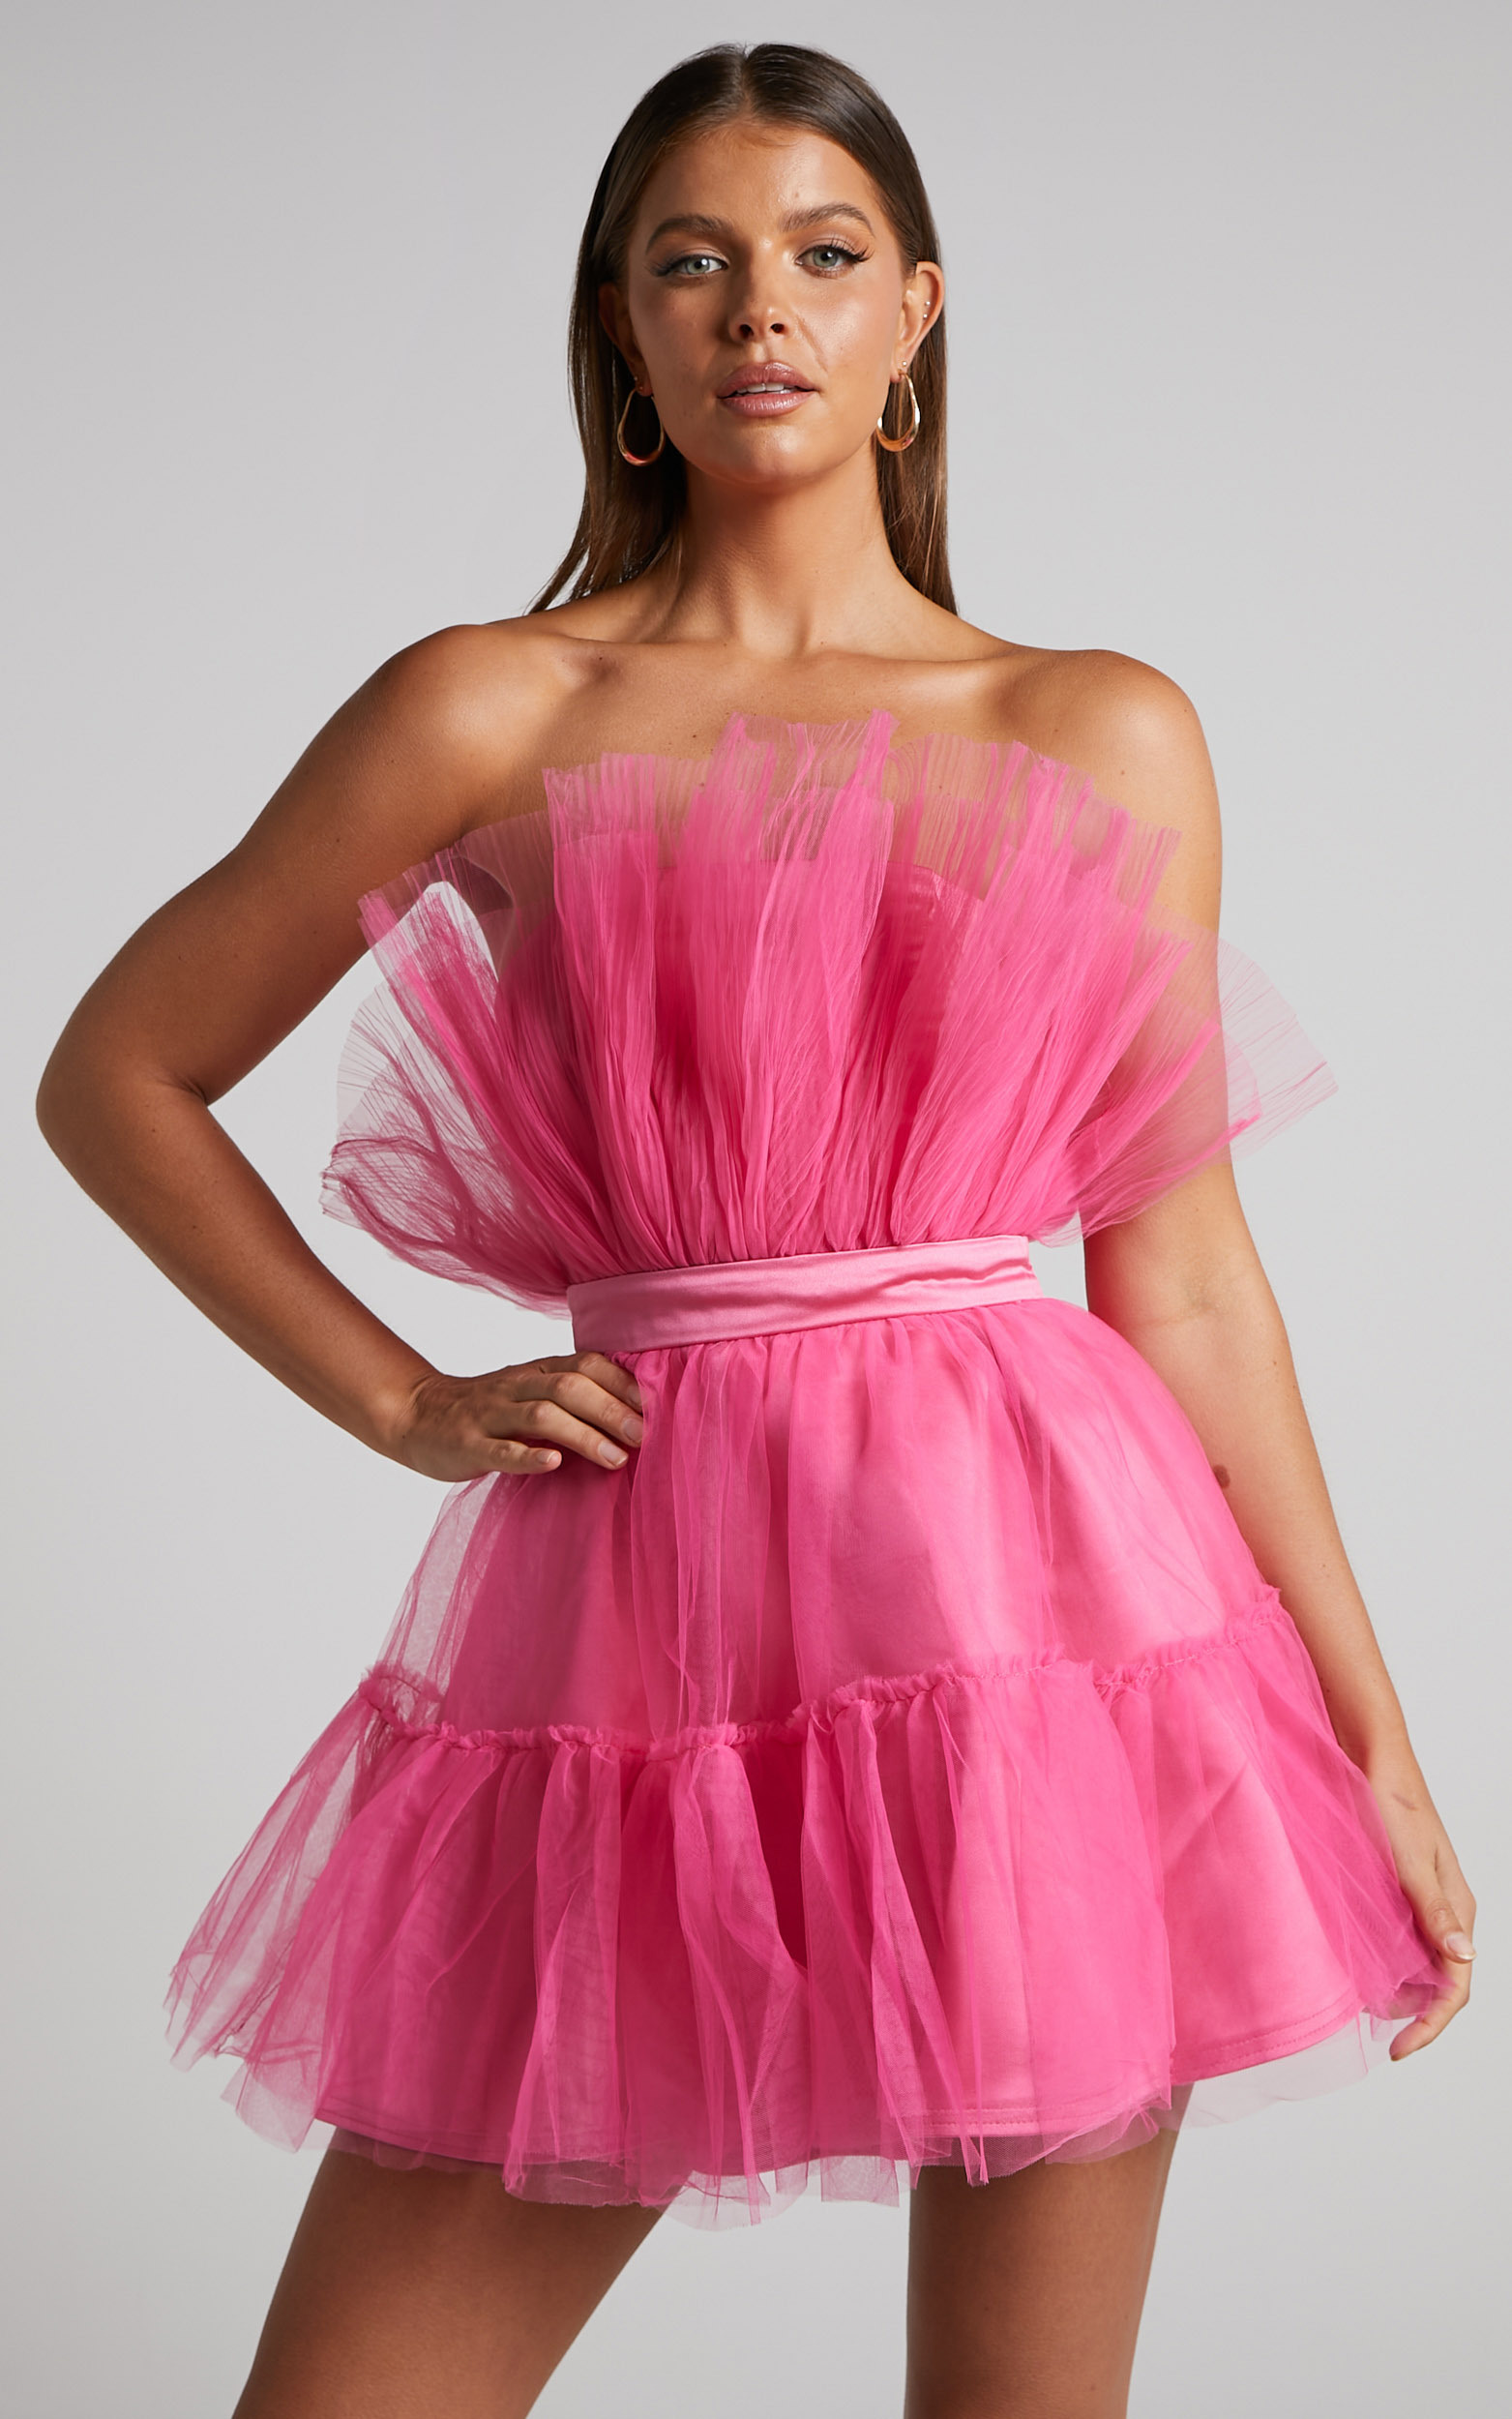 Amalya Mini Dress - Tiered Tulle Fit and Flare Dress in Hot Pink - 04, PNK2, hi-res image number null